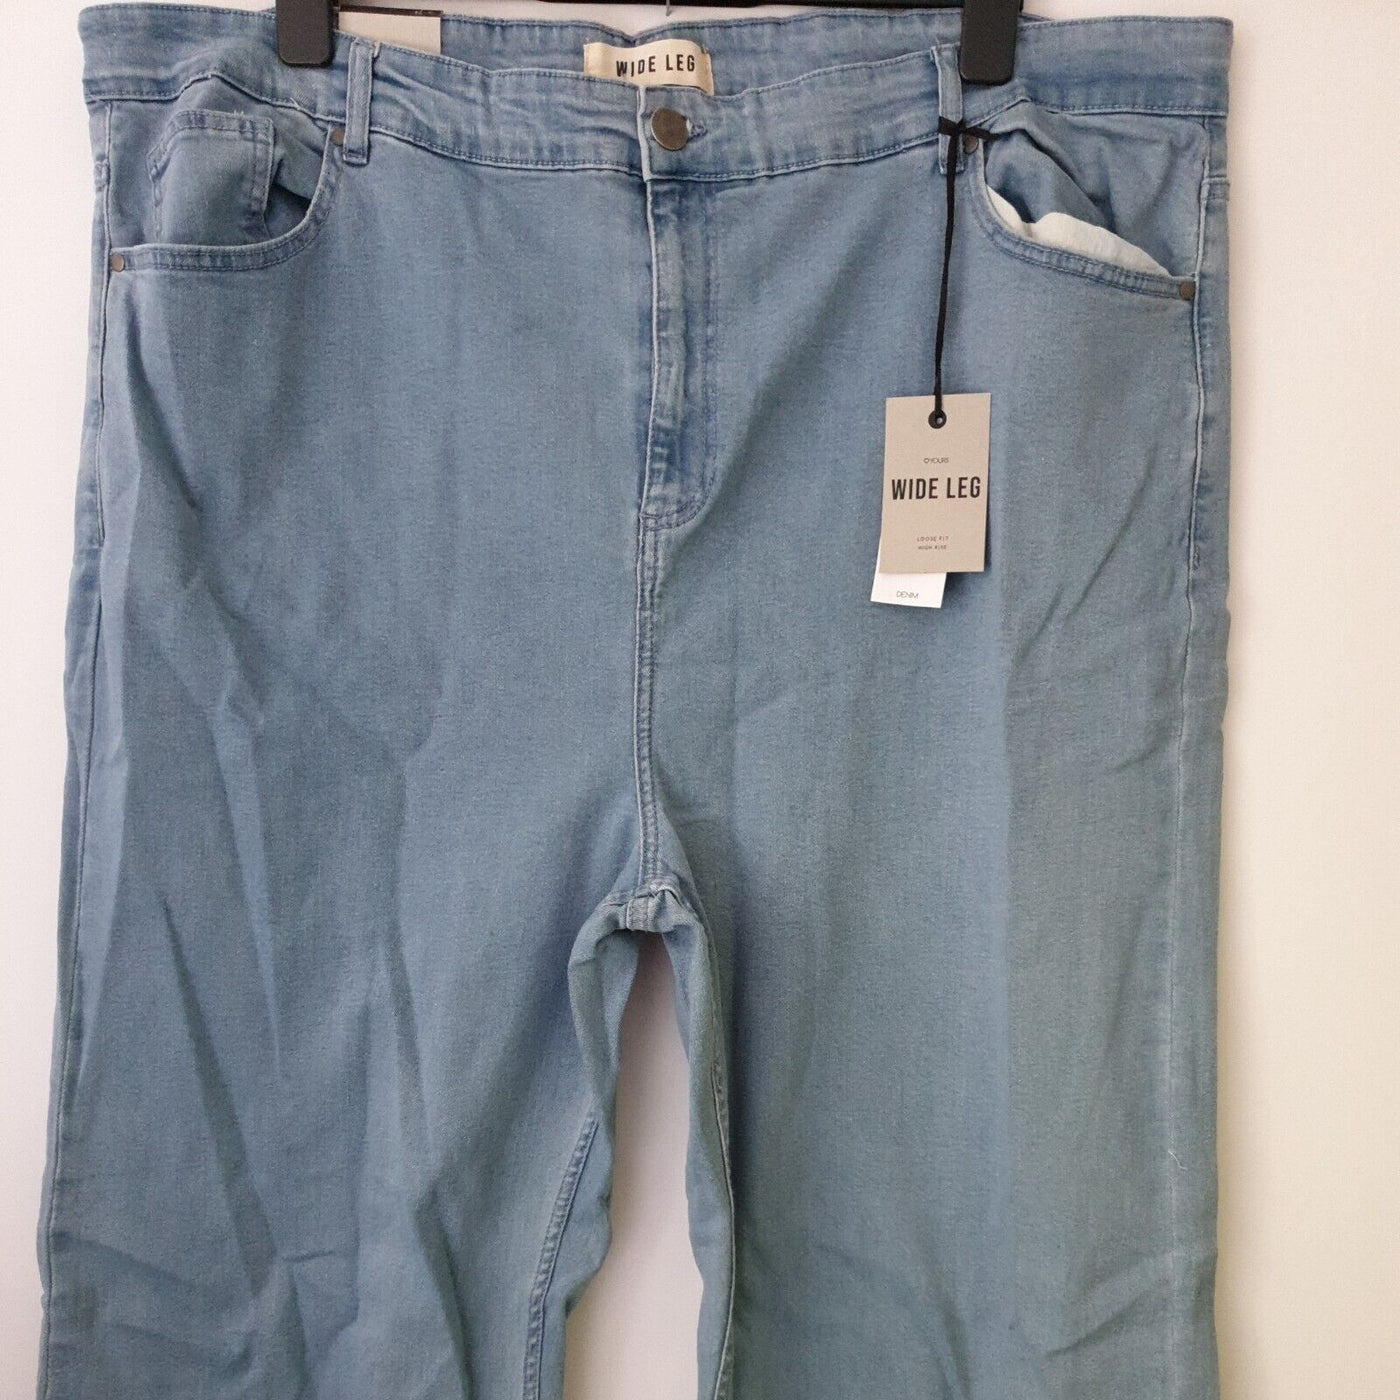 Yours Wide Leg Jeans Loose Fit High Rise. UK 26